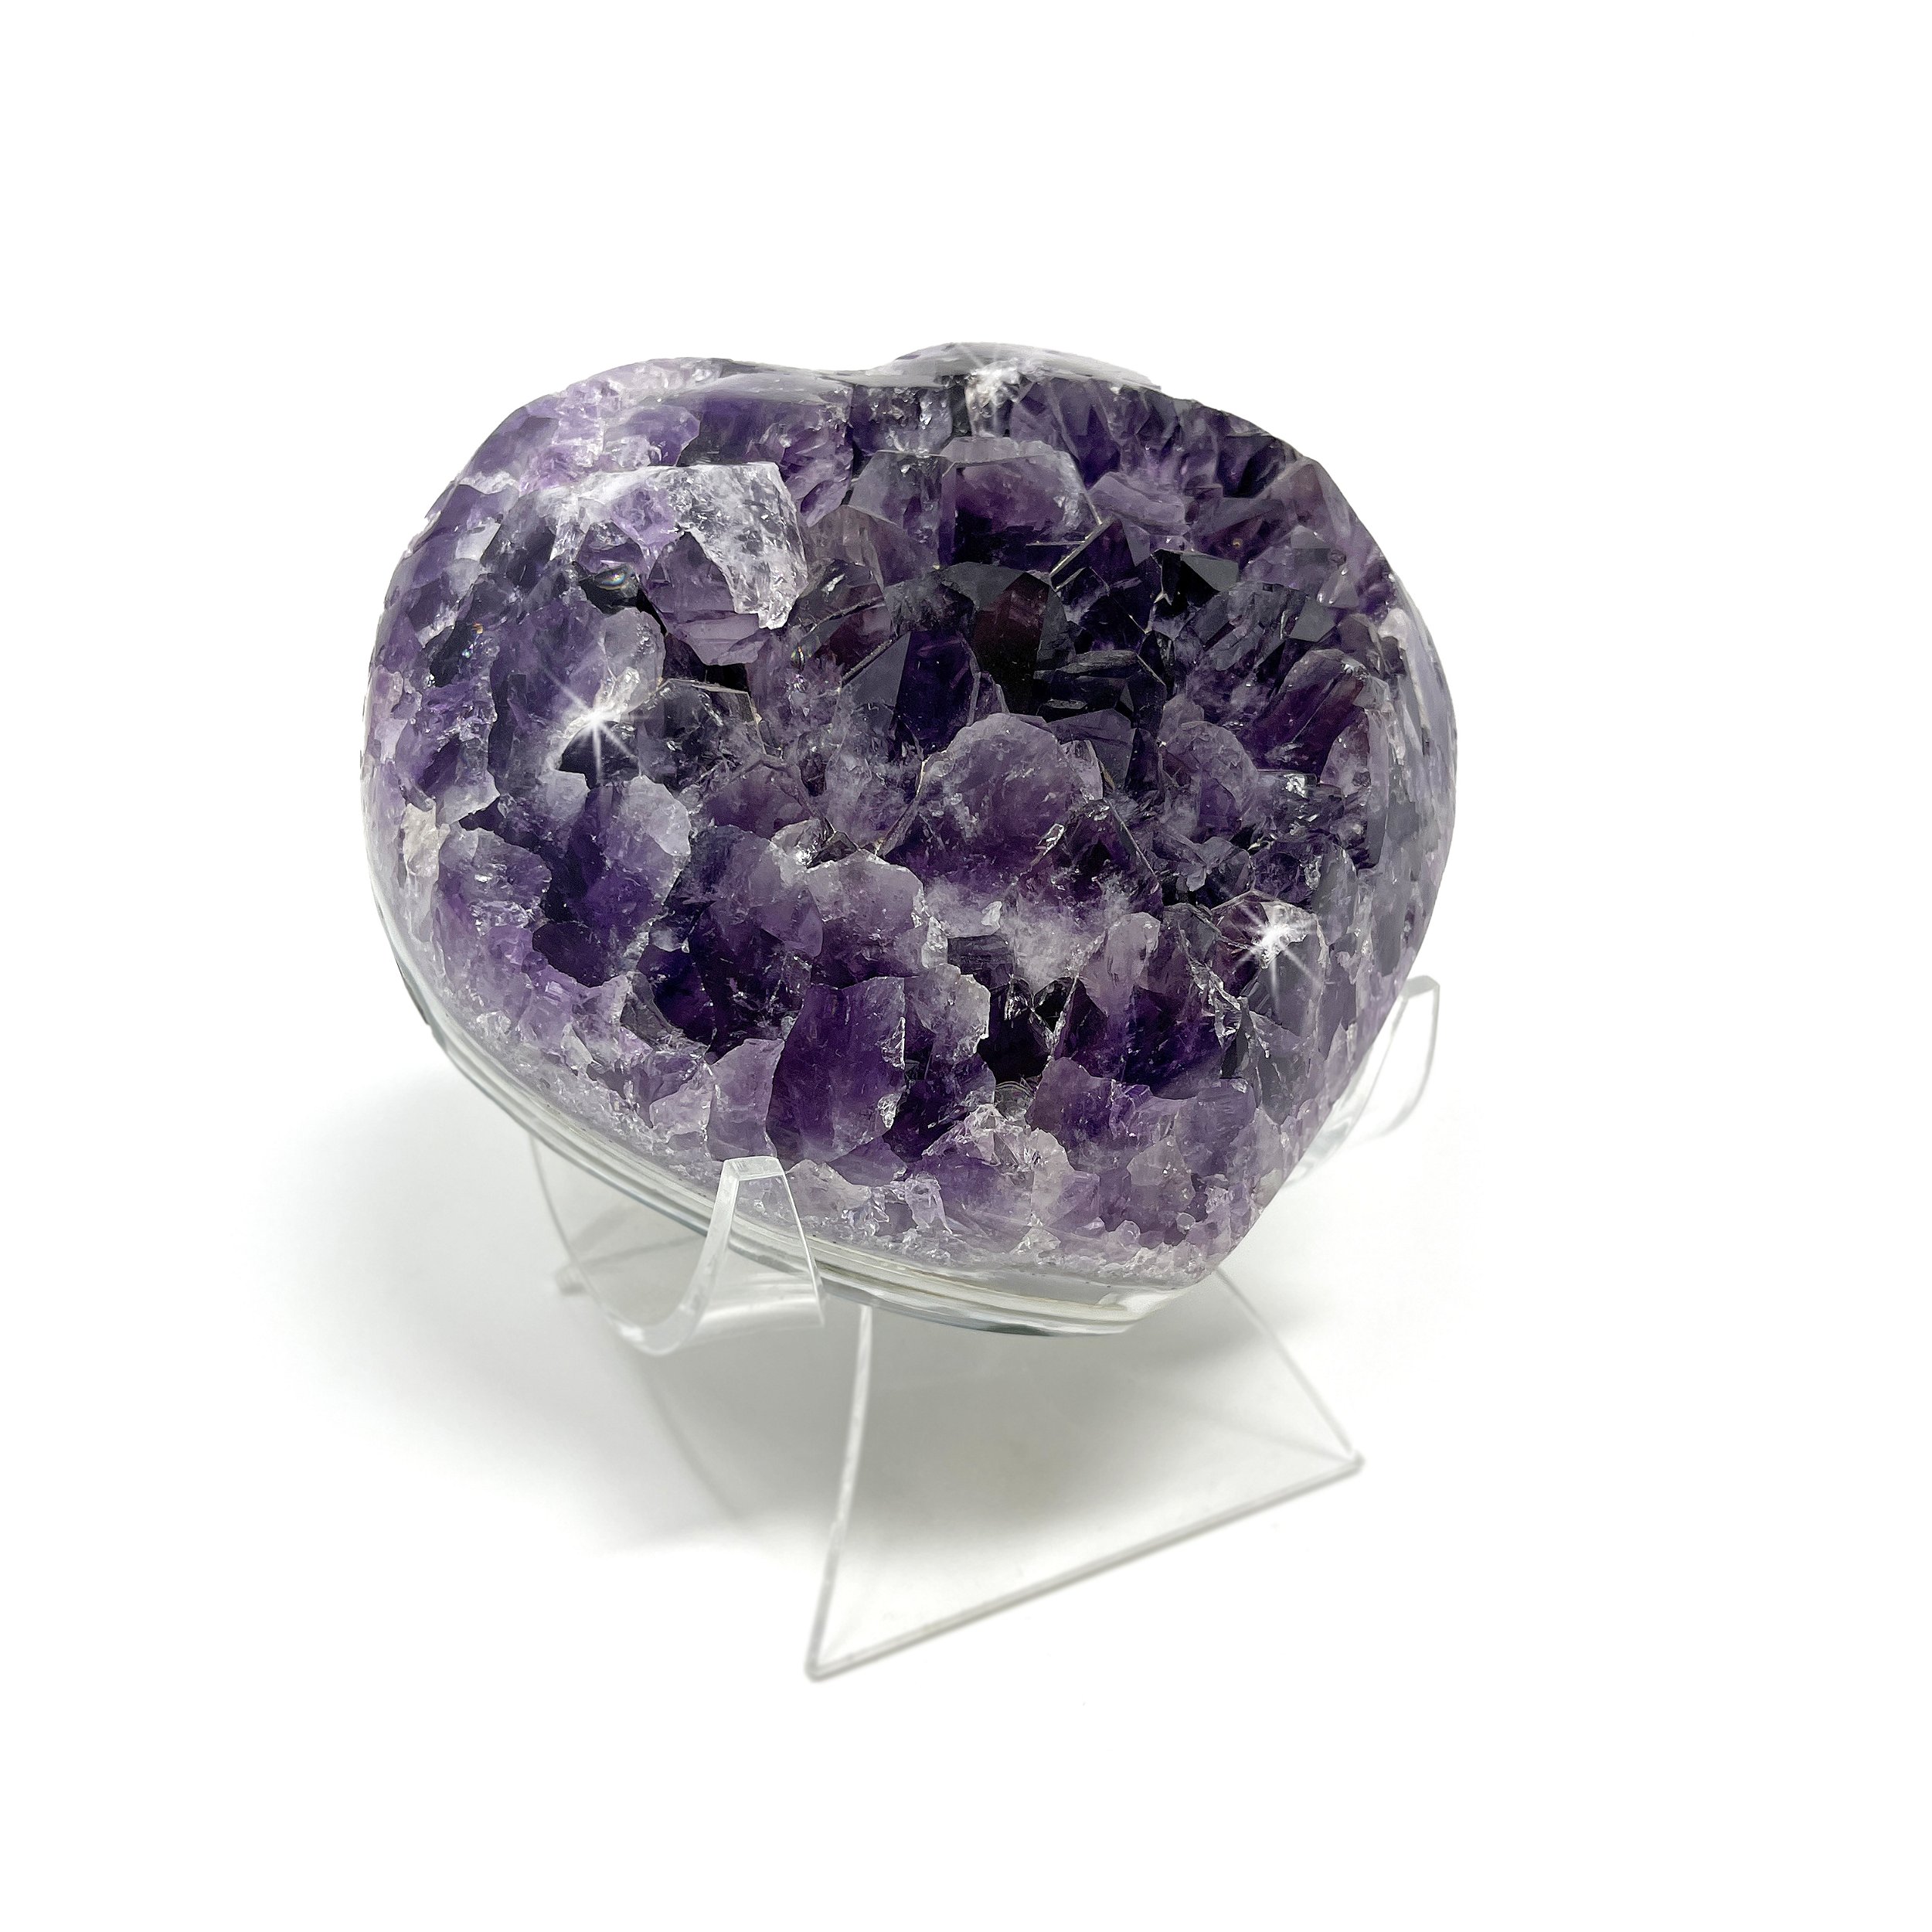 Amethyst Crystal Heart on Lucite Cradle Stand